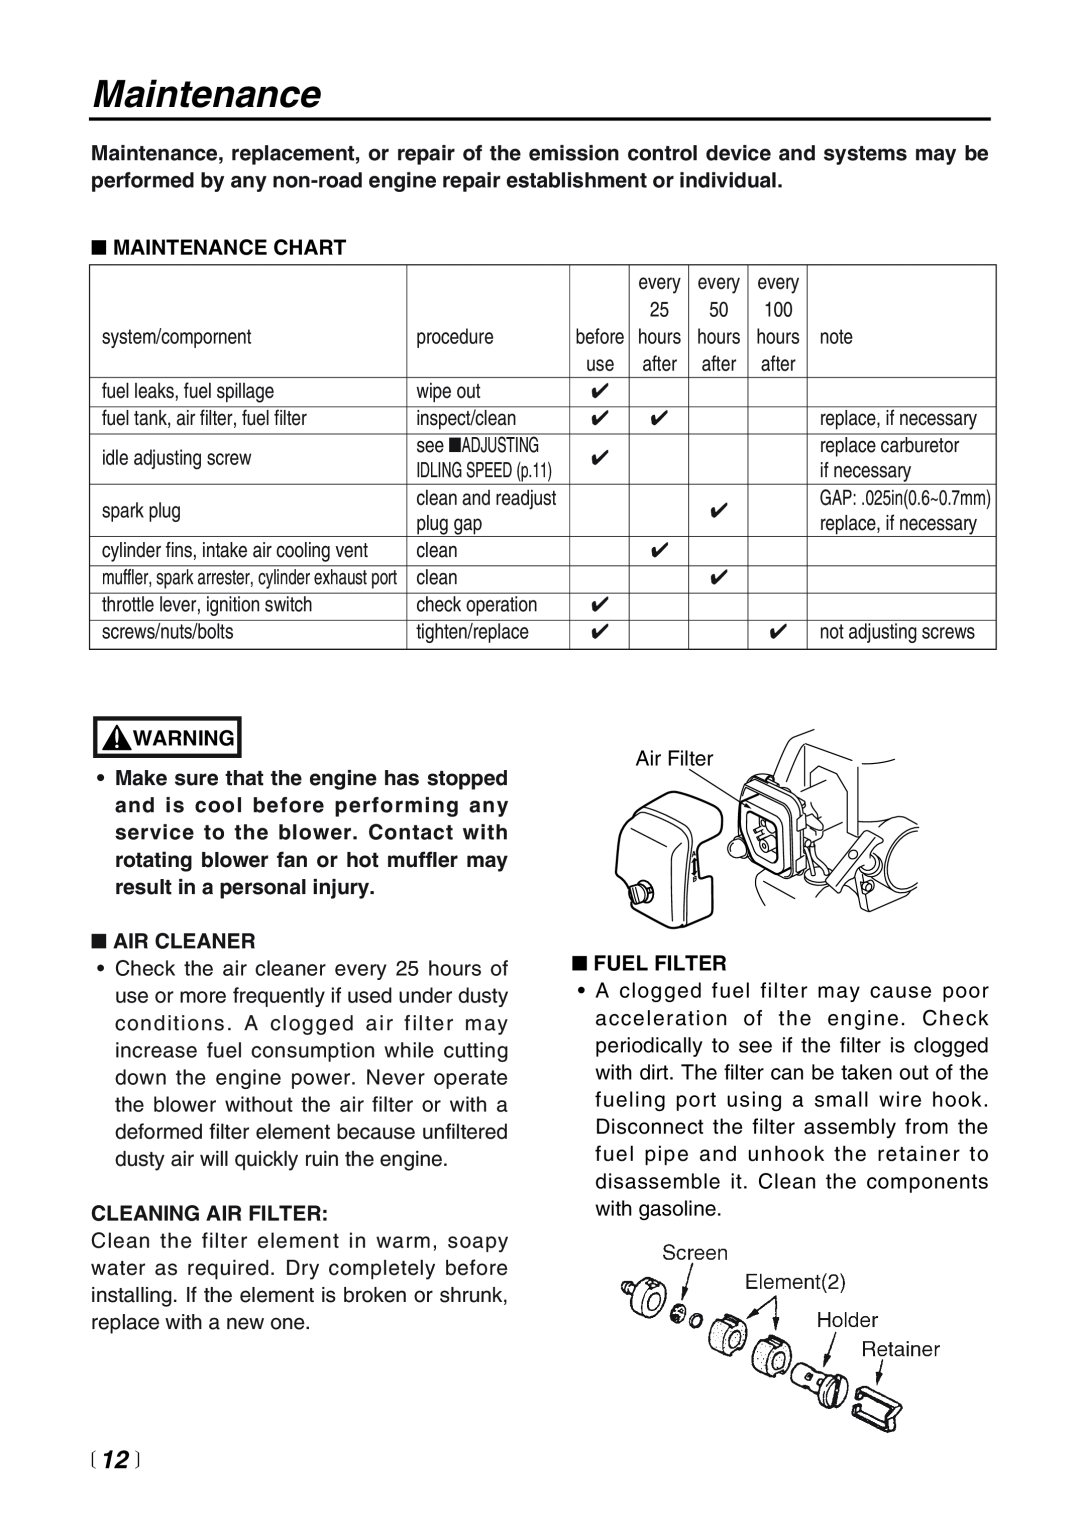 RedMax HB250 manual  12 , Maintenance Chart, Air Cleaner, Cleaning Air Filter, Fuel Filter 